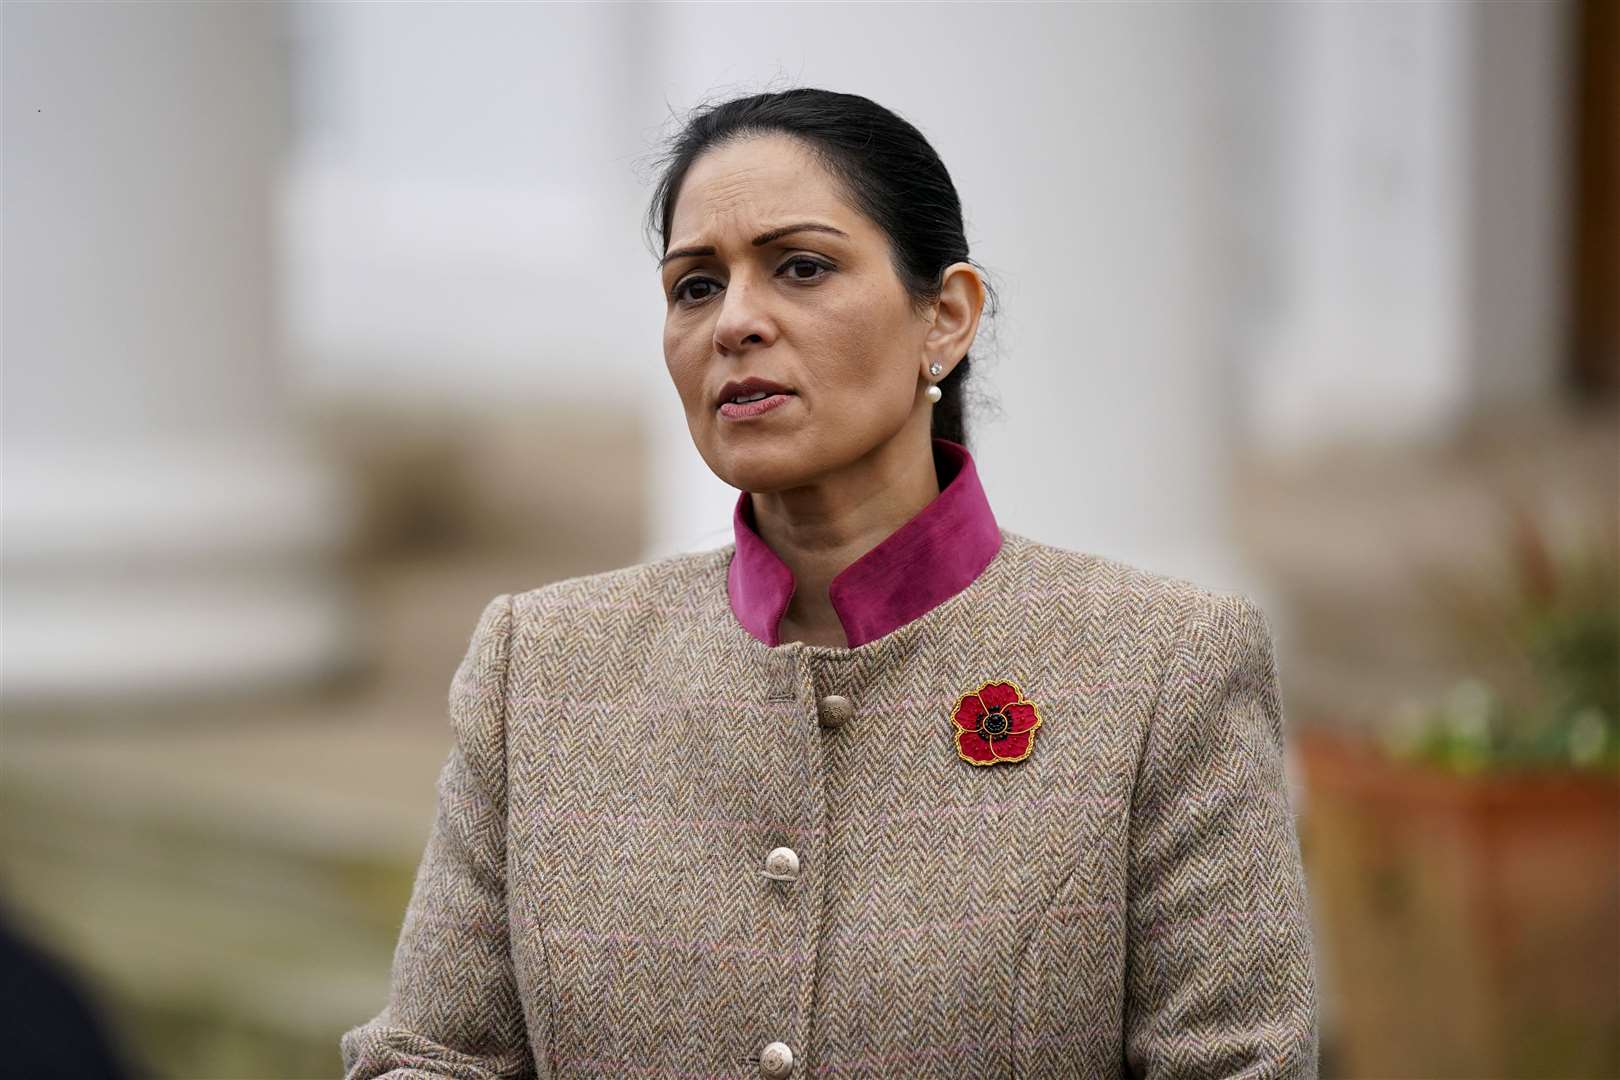 Home Secretary Priti Patel said the foundations for change had been laid (Steve Parsons/PA)